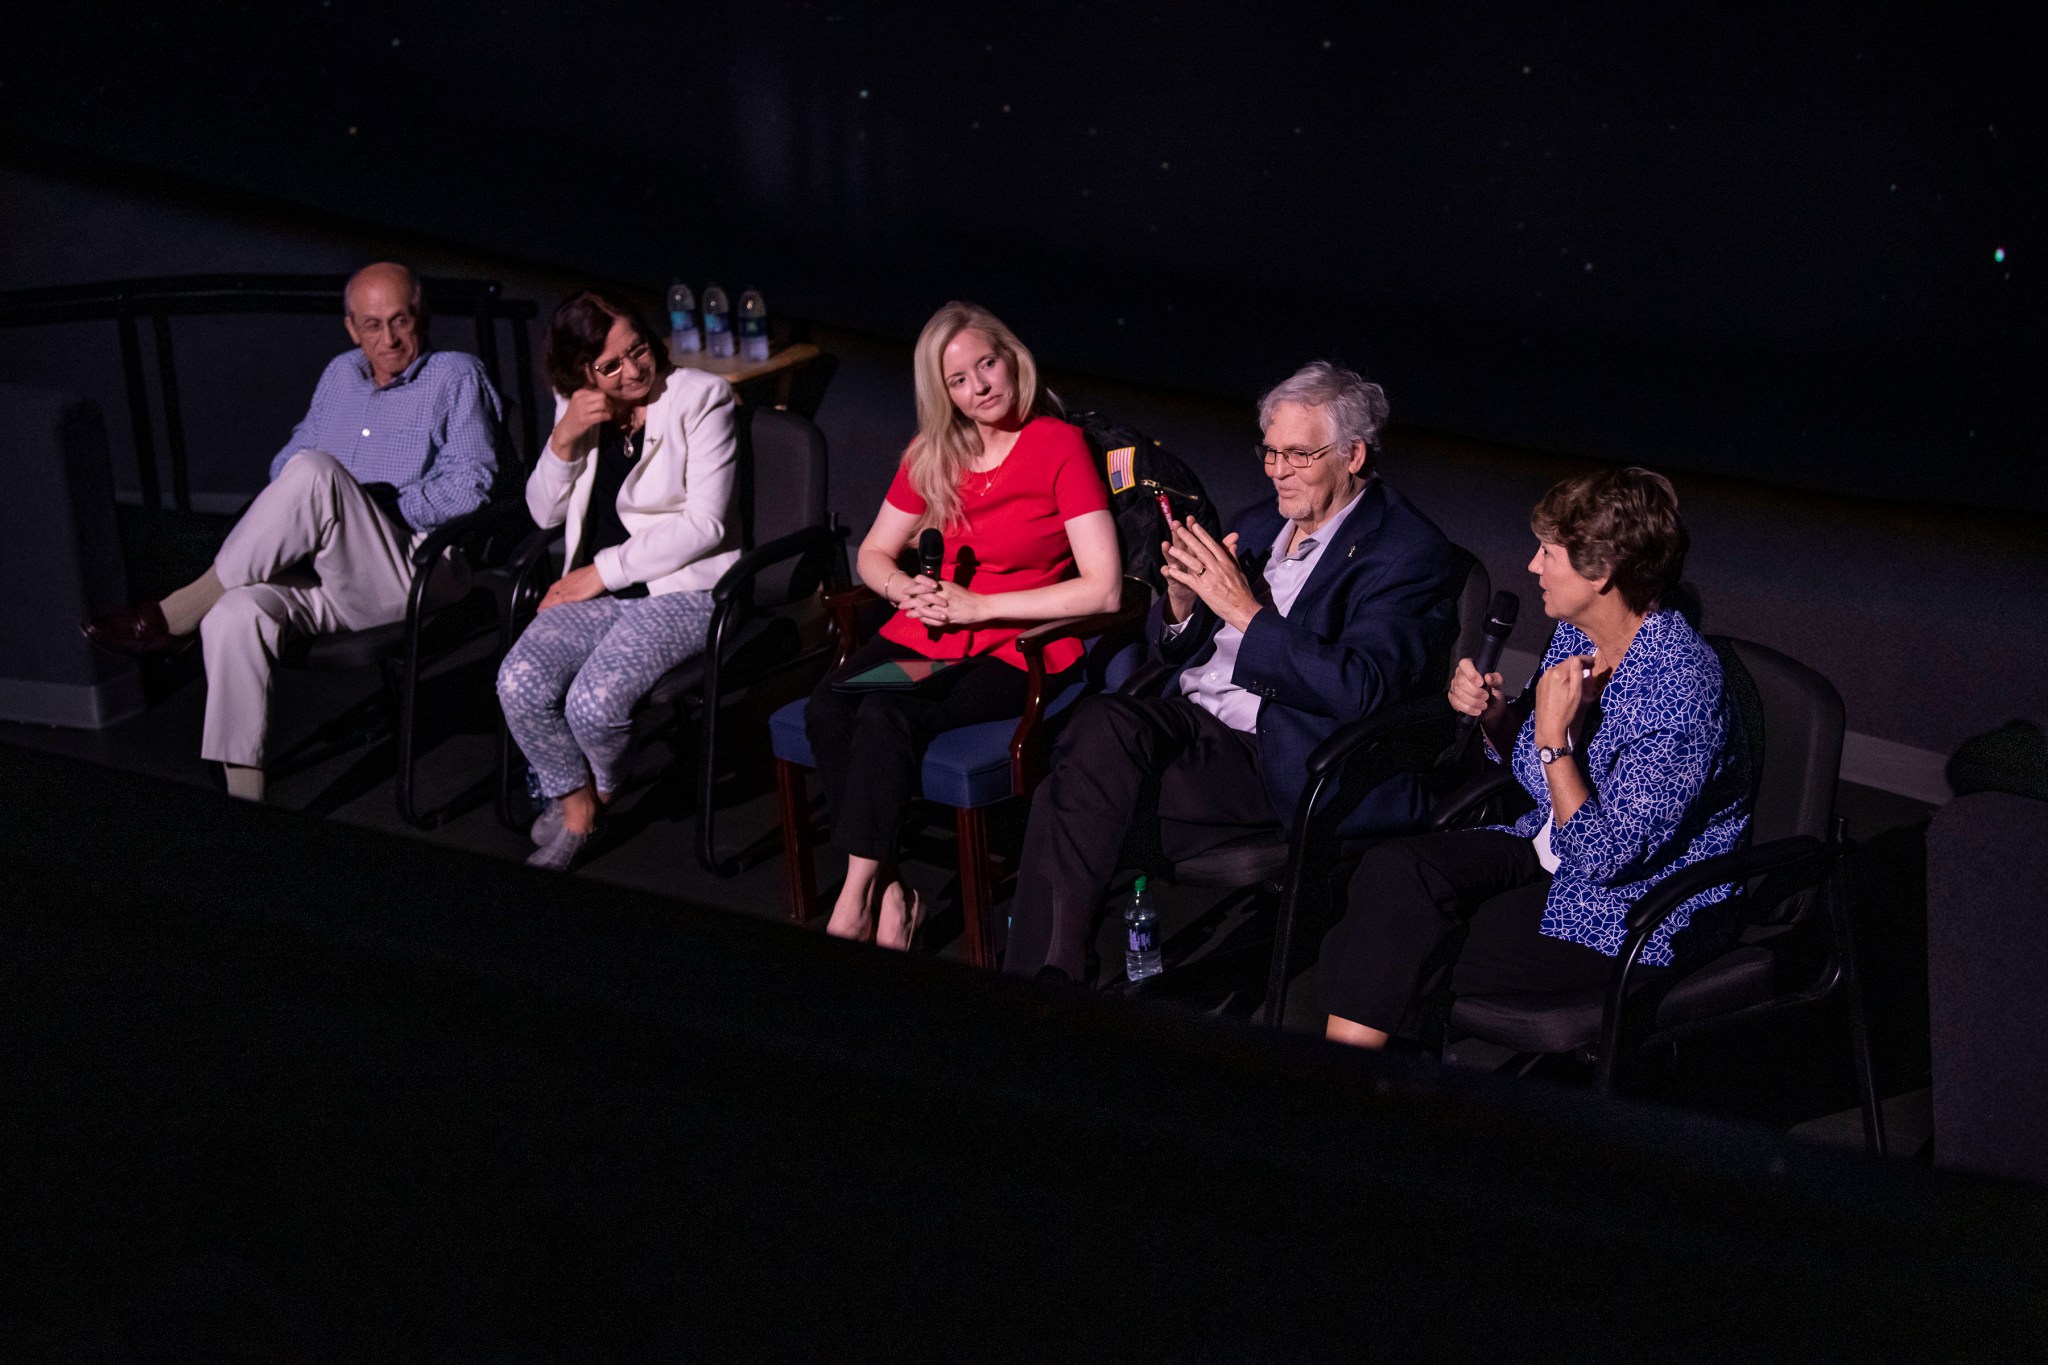 Retired NASA astronaut Eileen Collins, right, addresses the Chandra X-ray Observatory 20th anniversary panel Sept. 4.